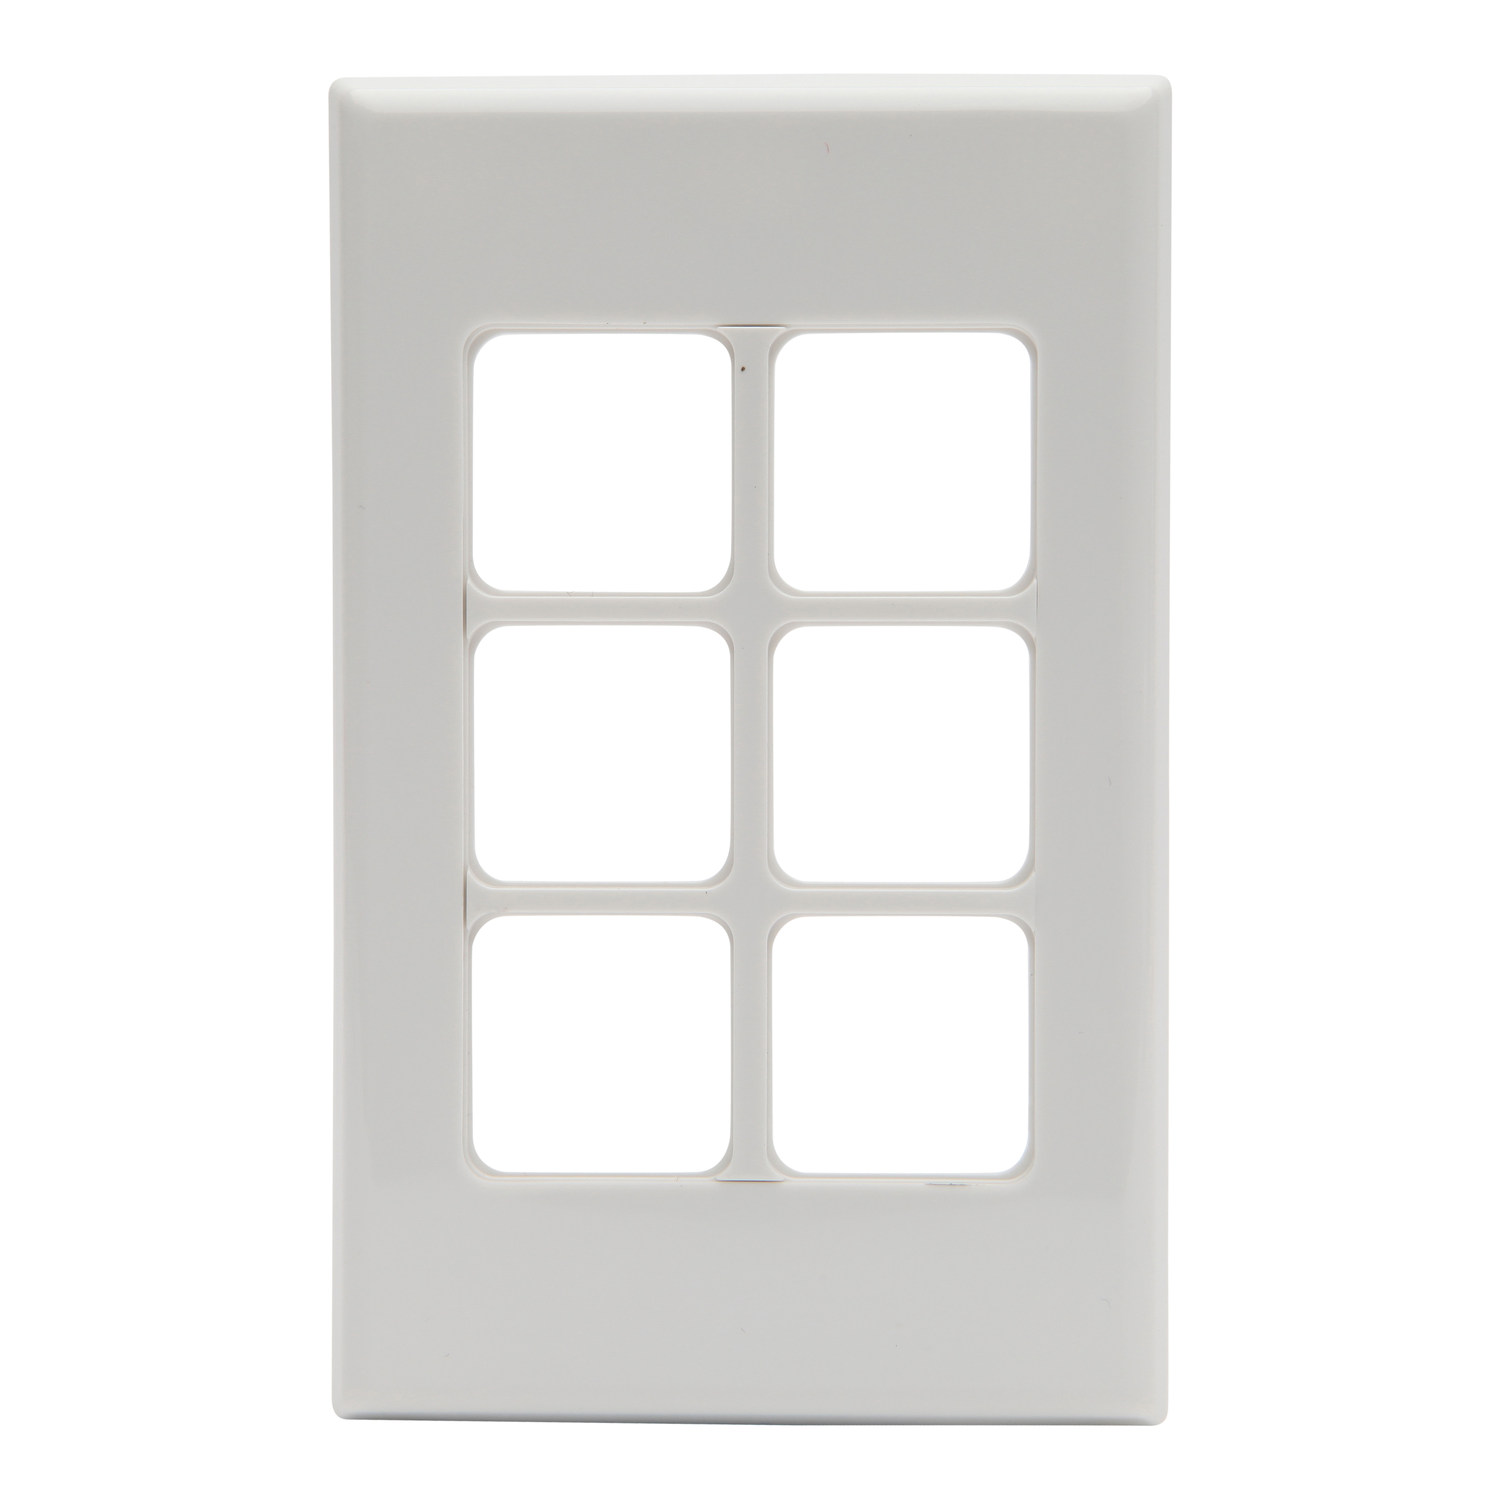 PDL 600 Series - Grid + Cover Plate Switch 6-Gang - White